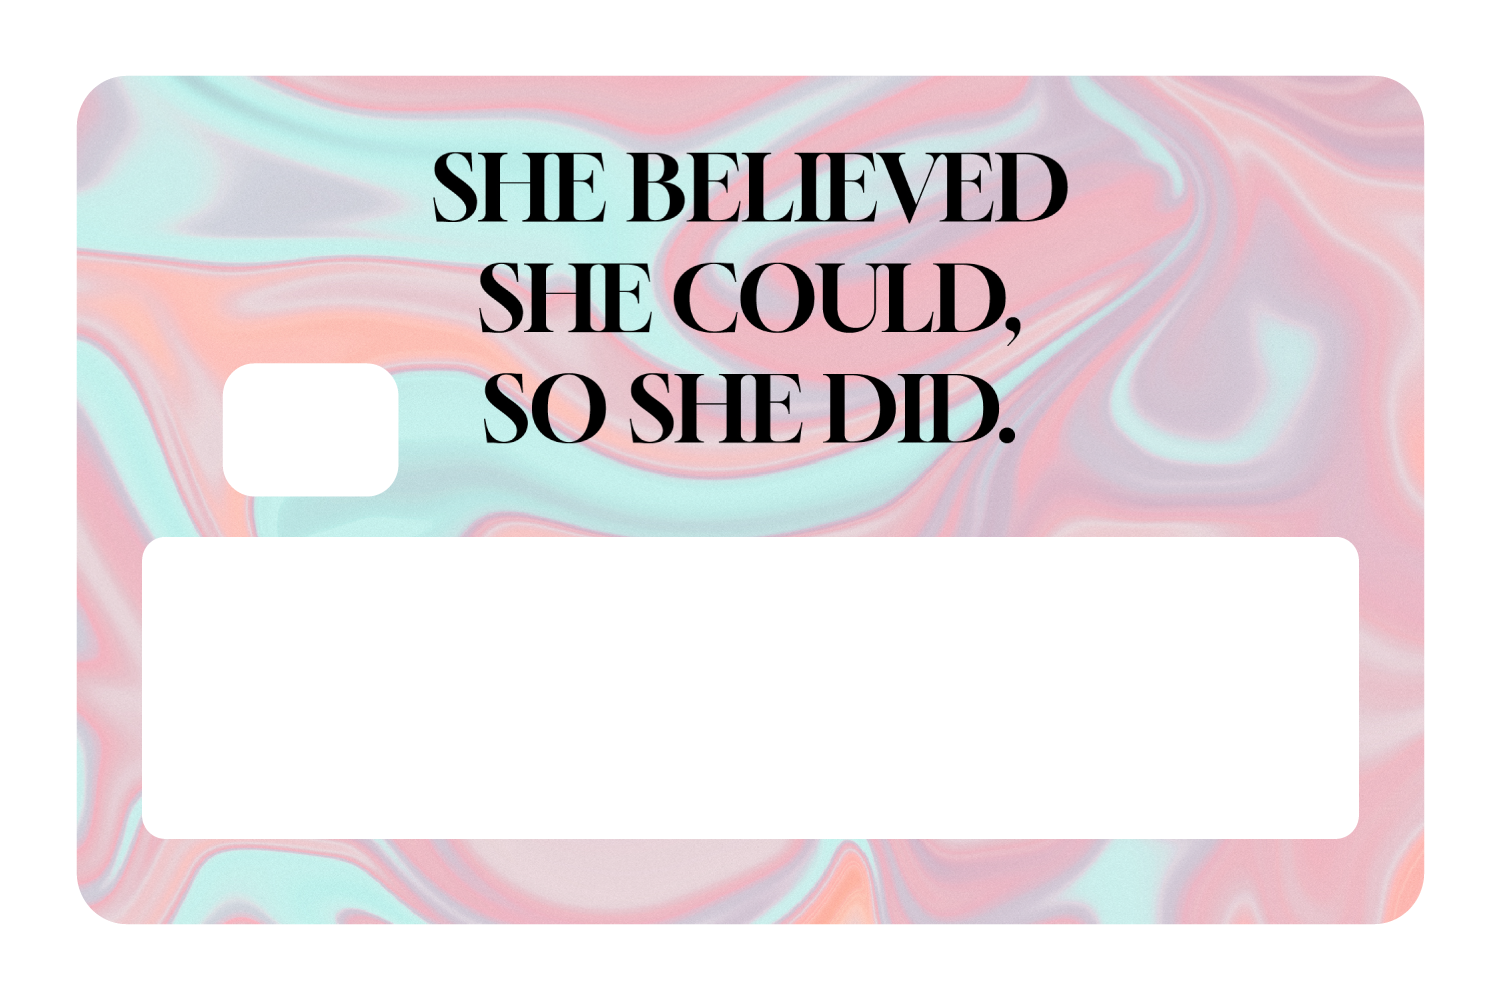 She Believed She Could